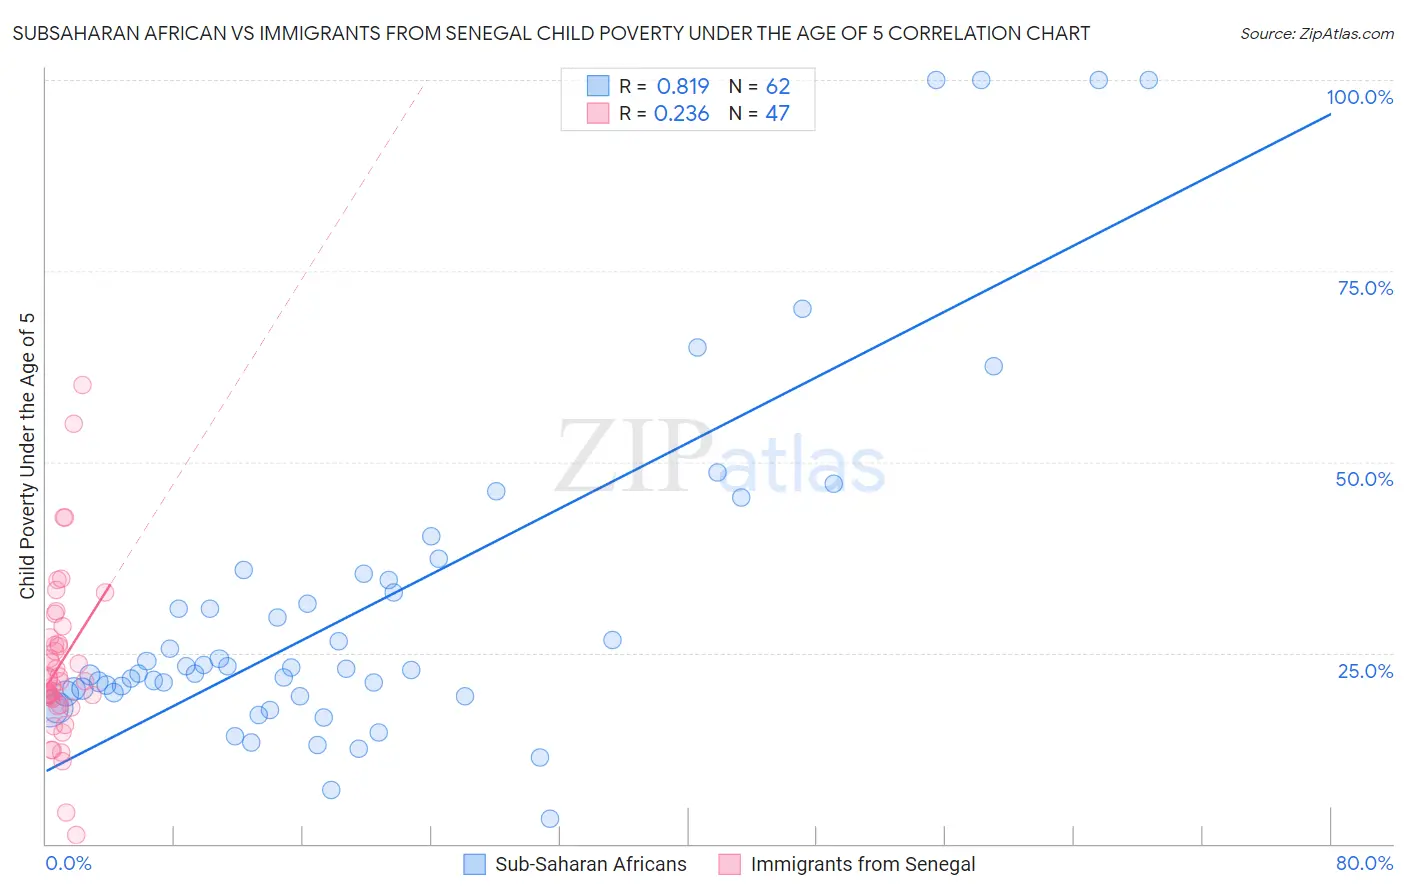 Subsaharan African vs Immigrants from Senegal Child Poverty Under the Age of 5